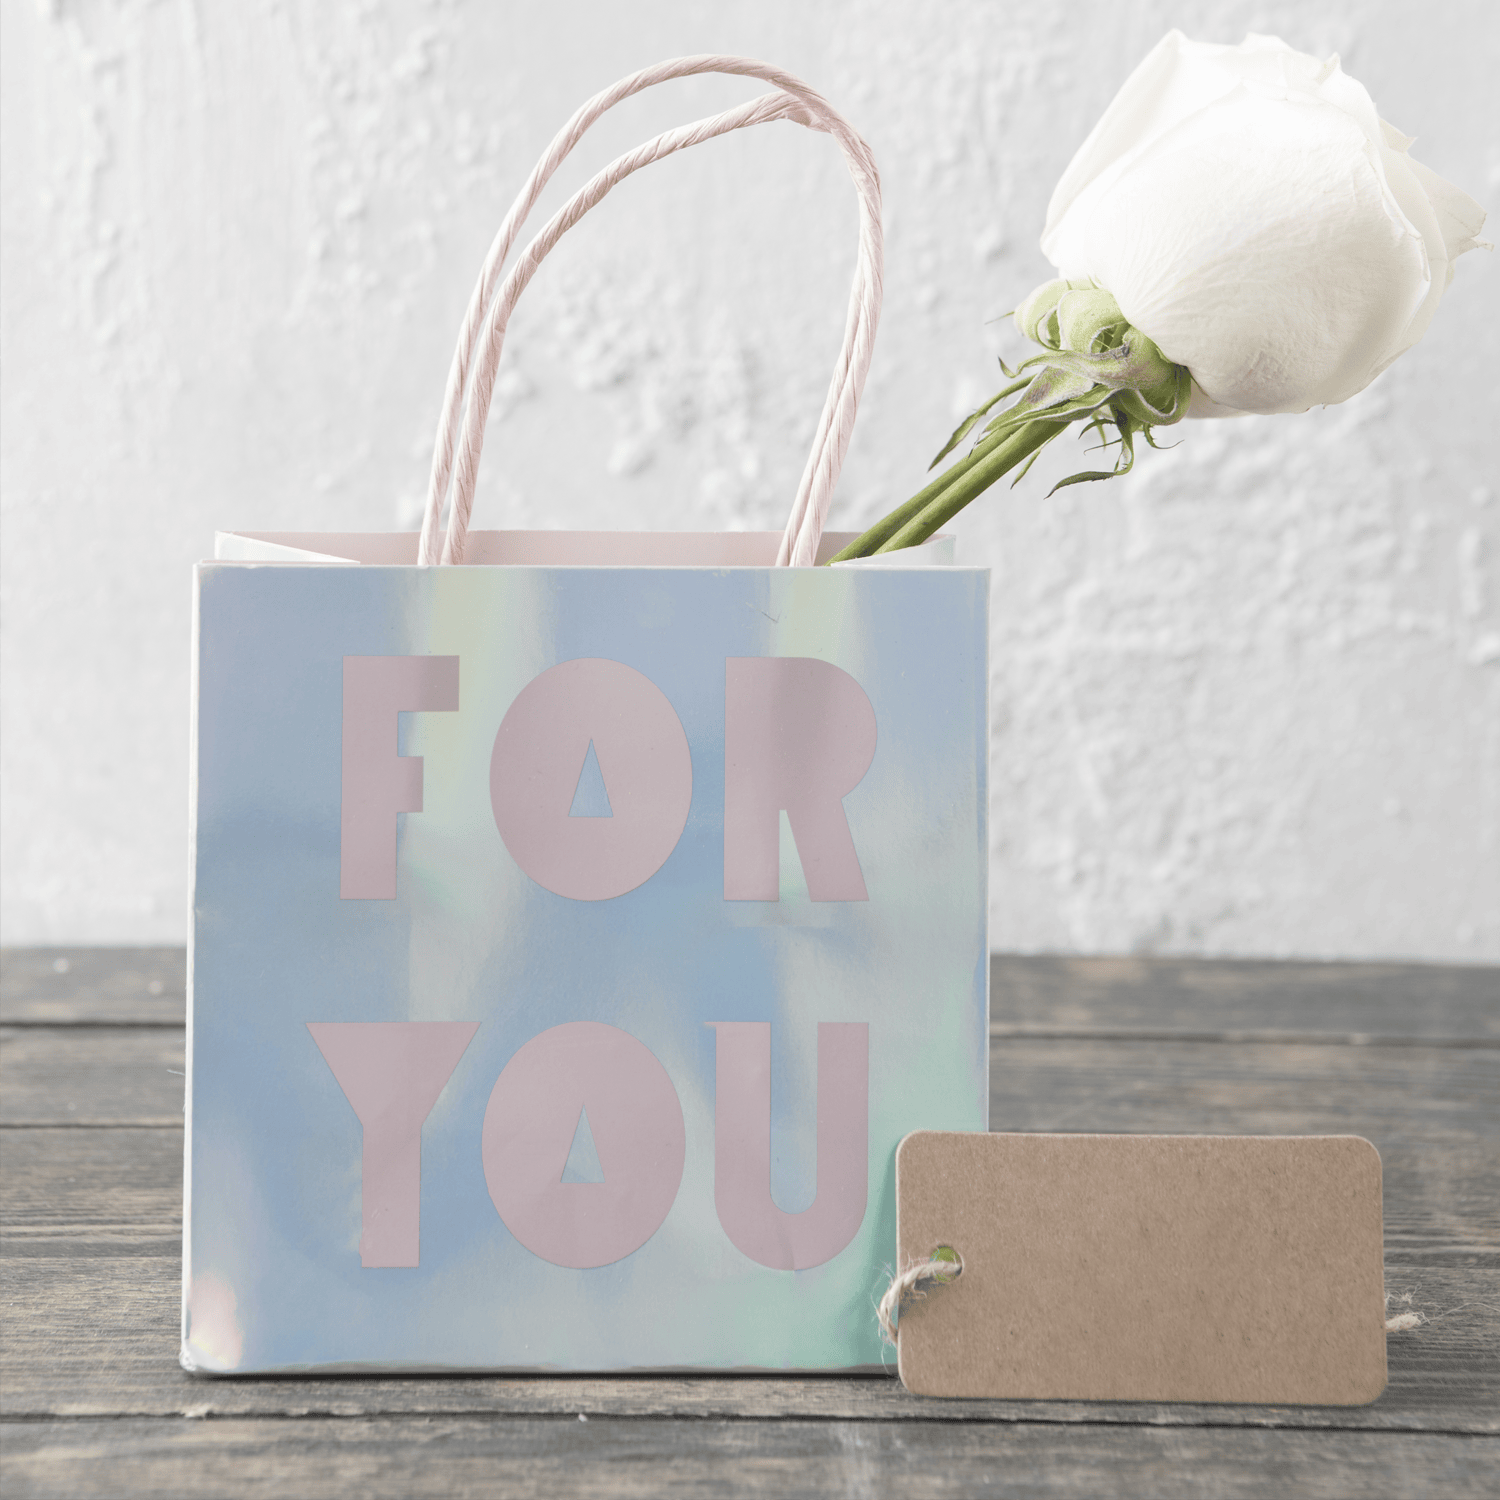 Kraft paper bags are an eco friendly alternative for branding